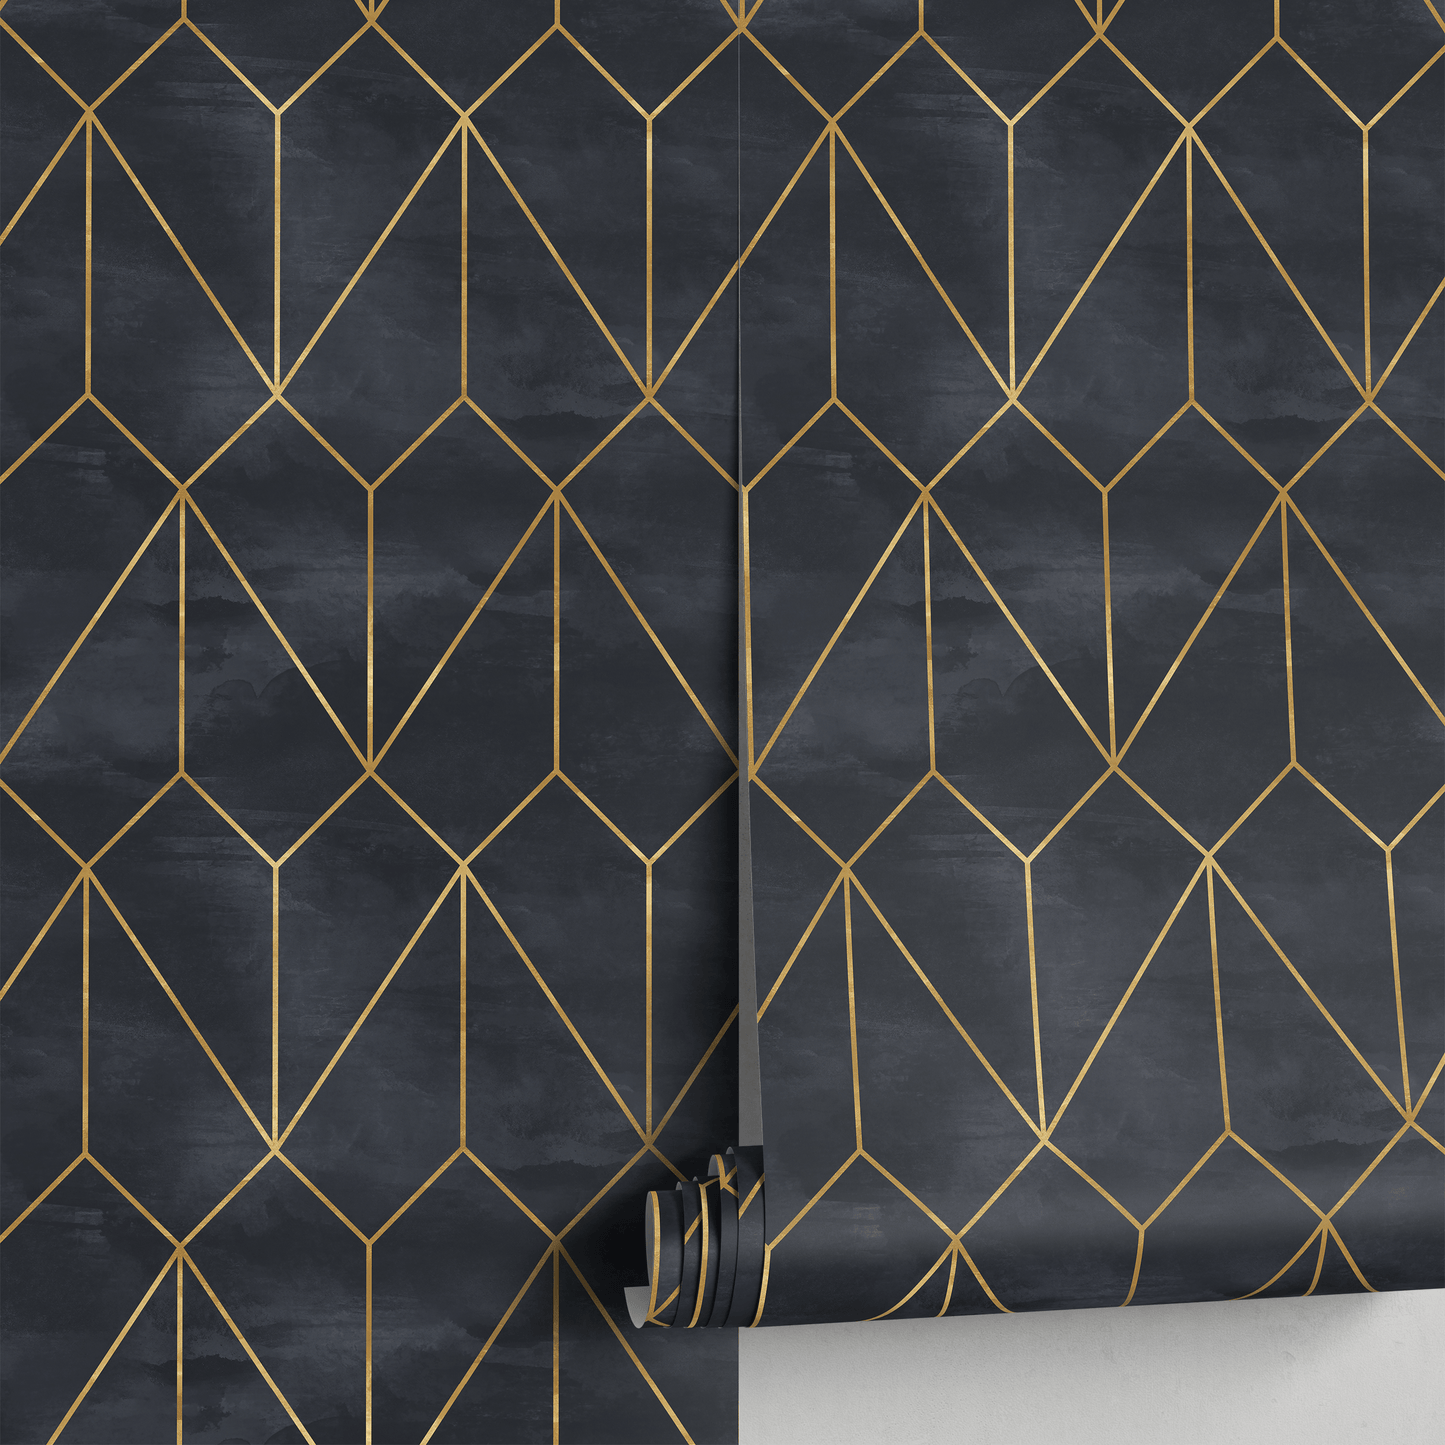 Removable Wallpaper Peel and Stick Wallpaper Wall Paper Wall Mural - Dark Blue and Non-Metalic Yellow Gold Color - A540